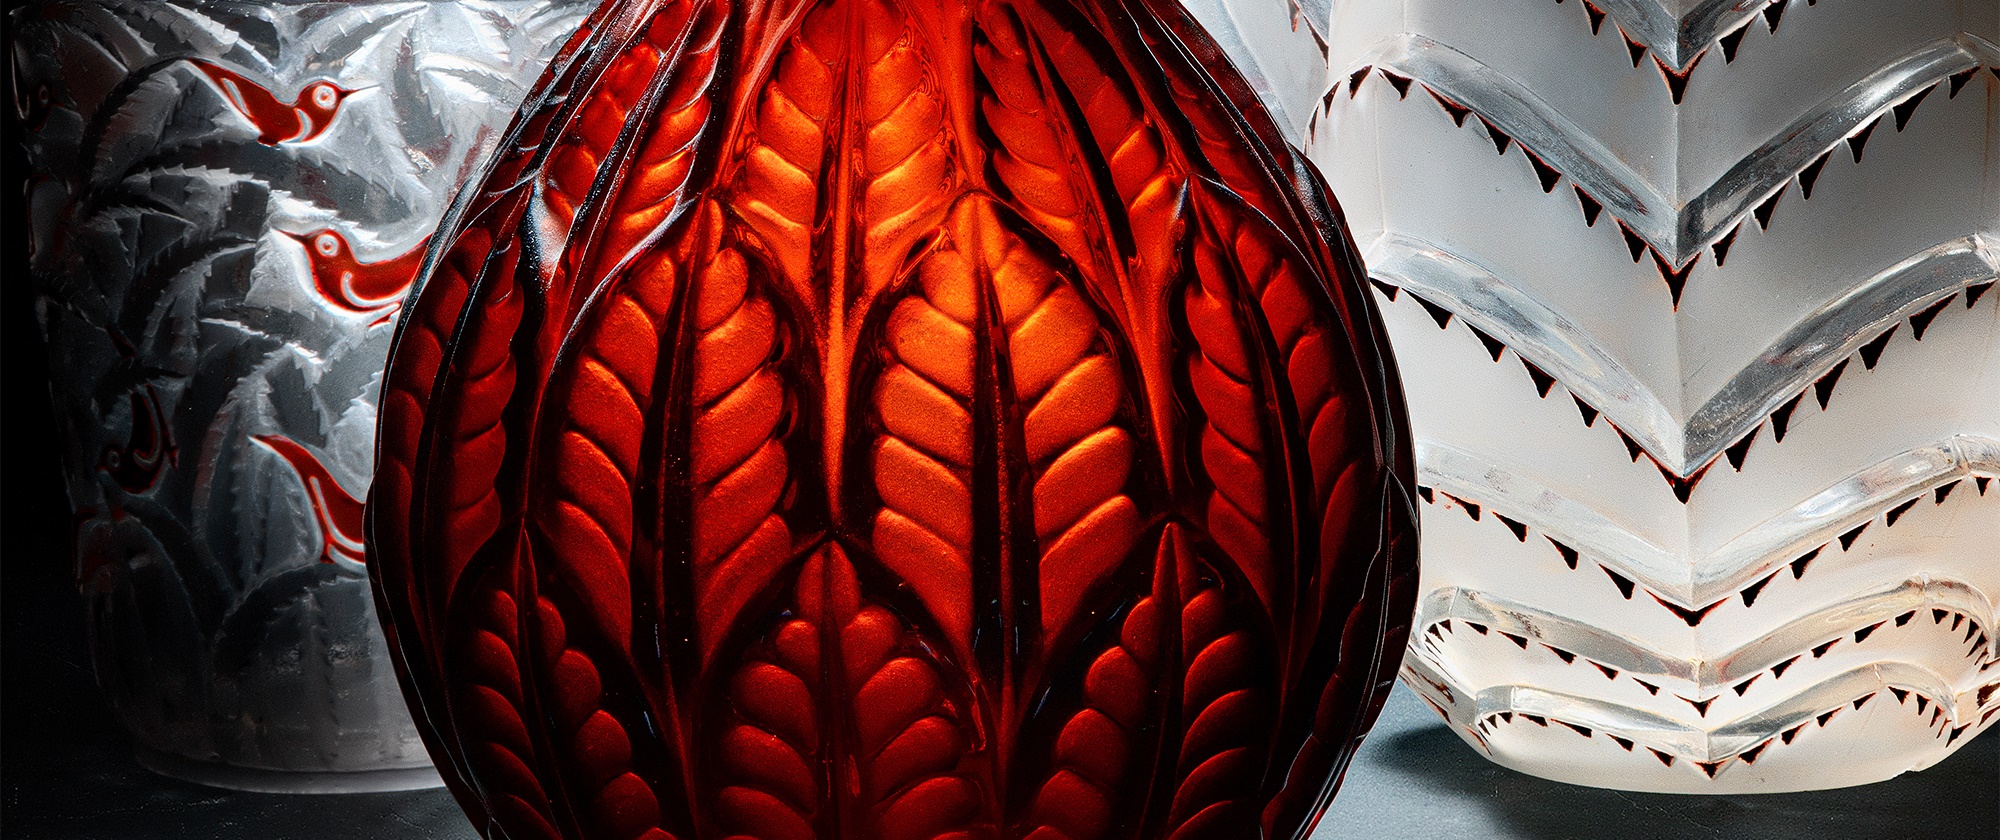 Lalique: The Inaugural Auction